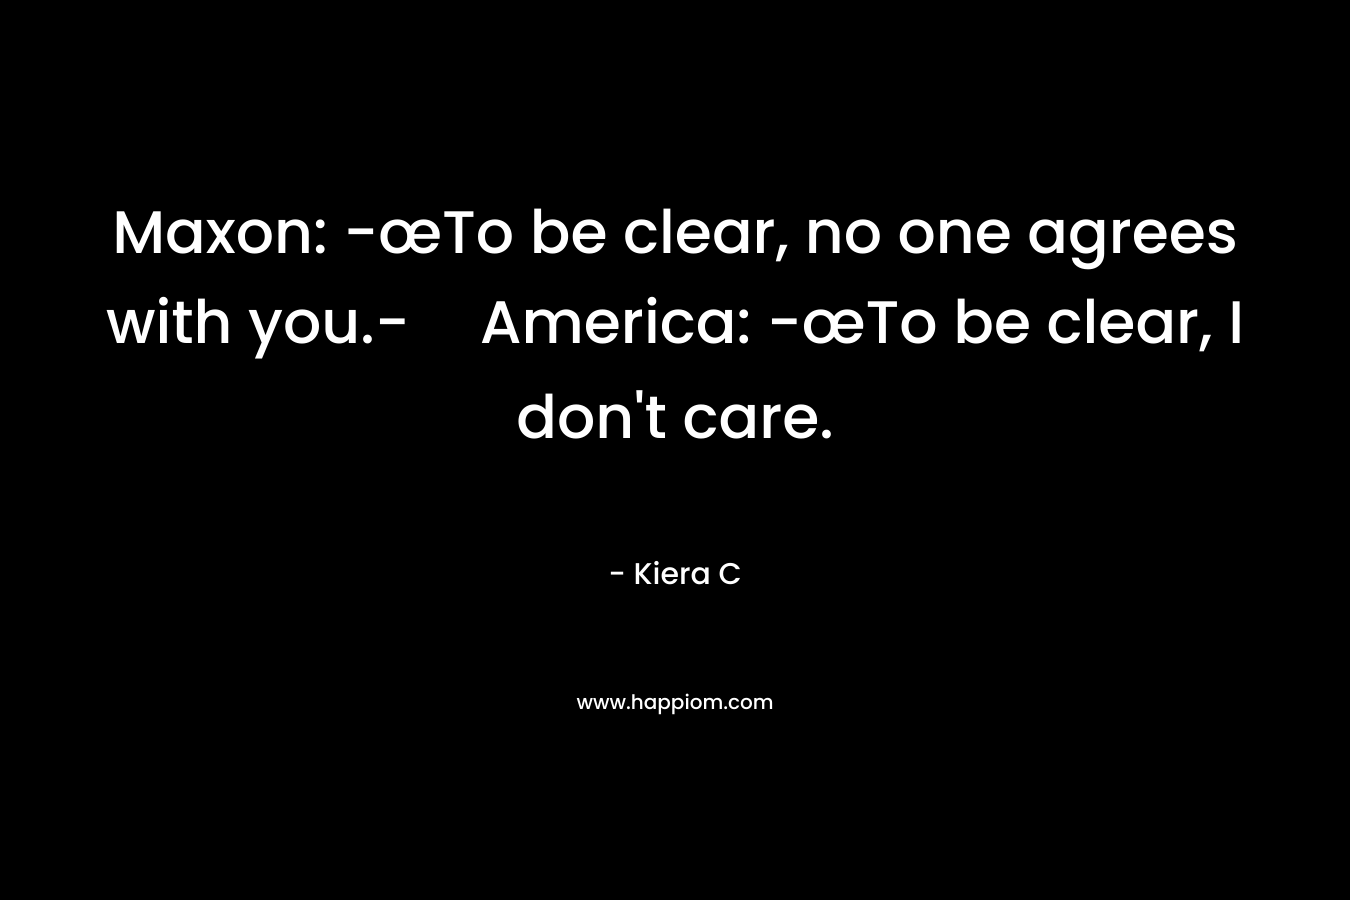 Maxon: -œTo be clear, no one agrees with you.-America: -œTo be clear, I don’t care. – Kiera C